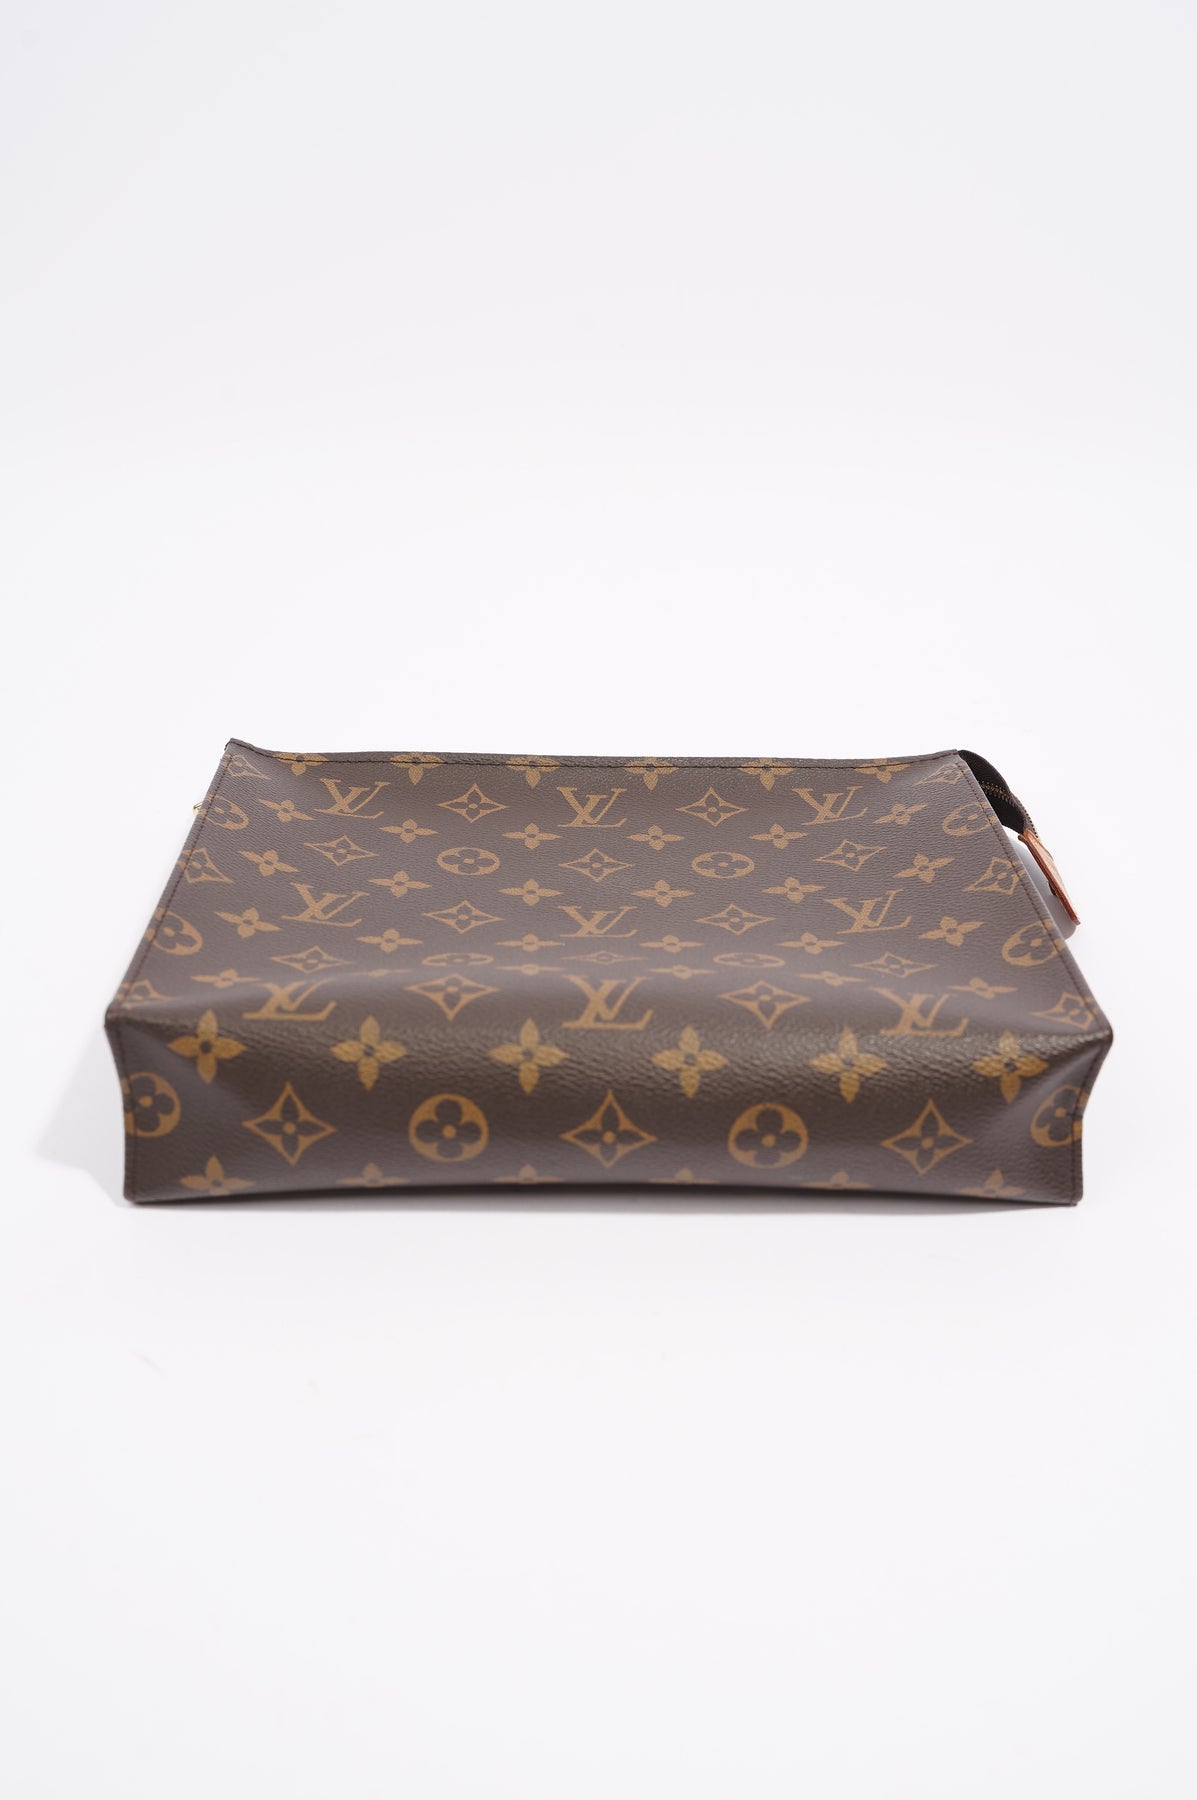 Louis Vuitton Womens Toiletry Pouch 26 Monogram Canvas – Luxe Collective